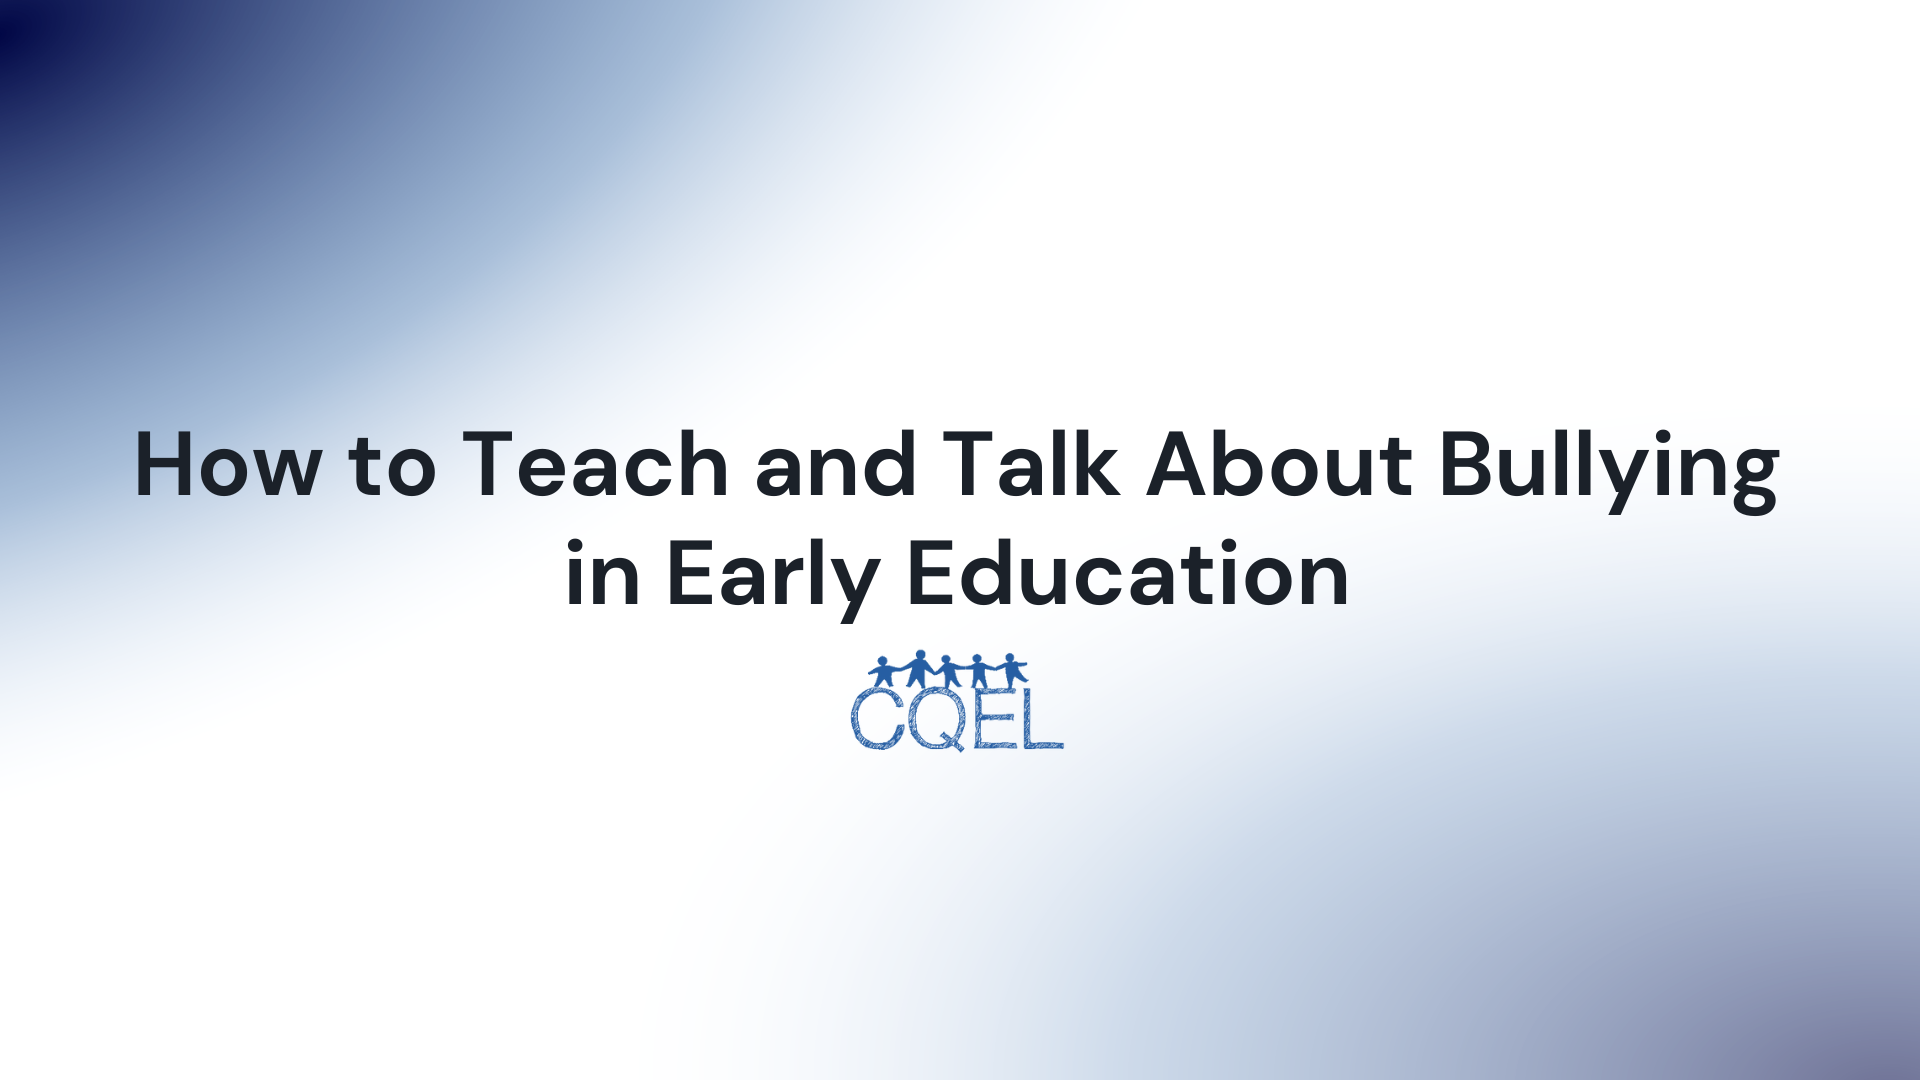 How to Teach and Talk About Bullying in Early Education